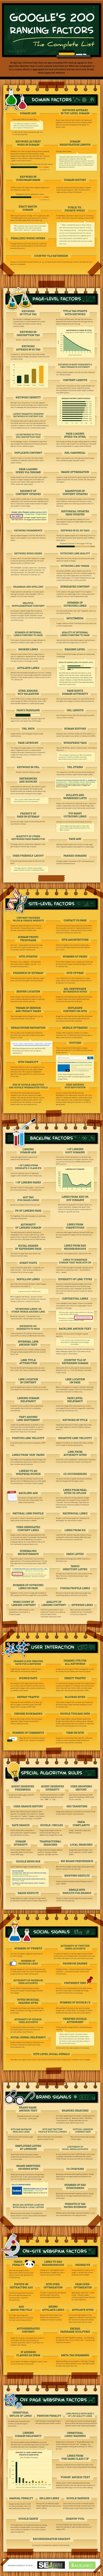 Maybe The Longest Infographic - Google’s 200 Ranking Factors